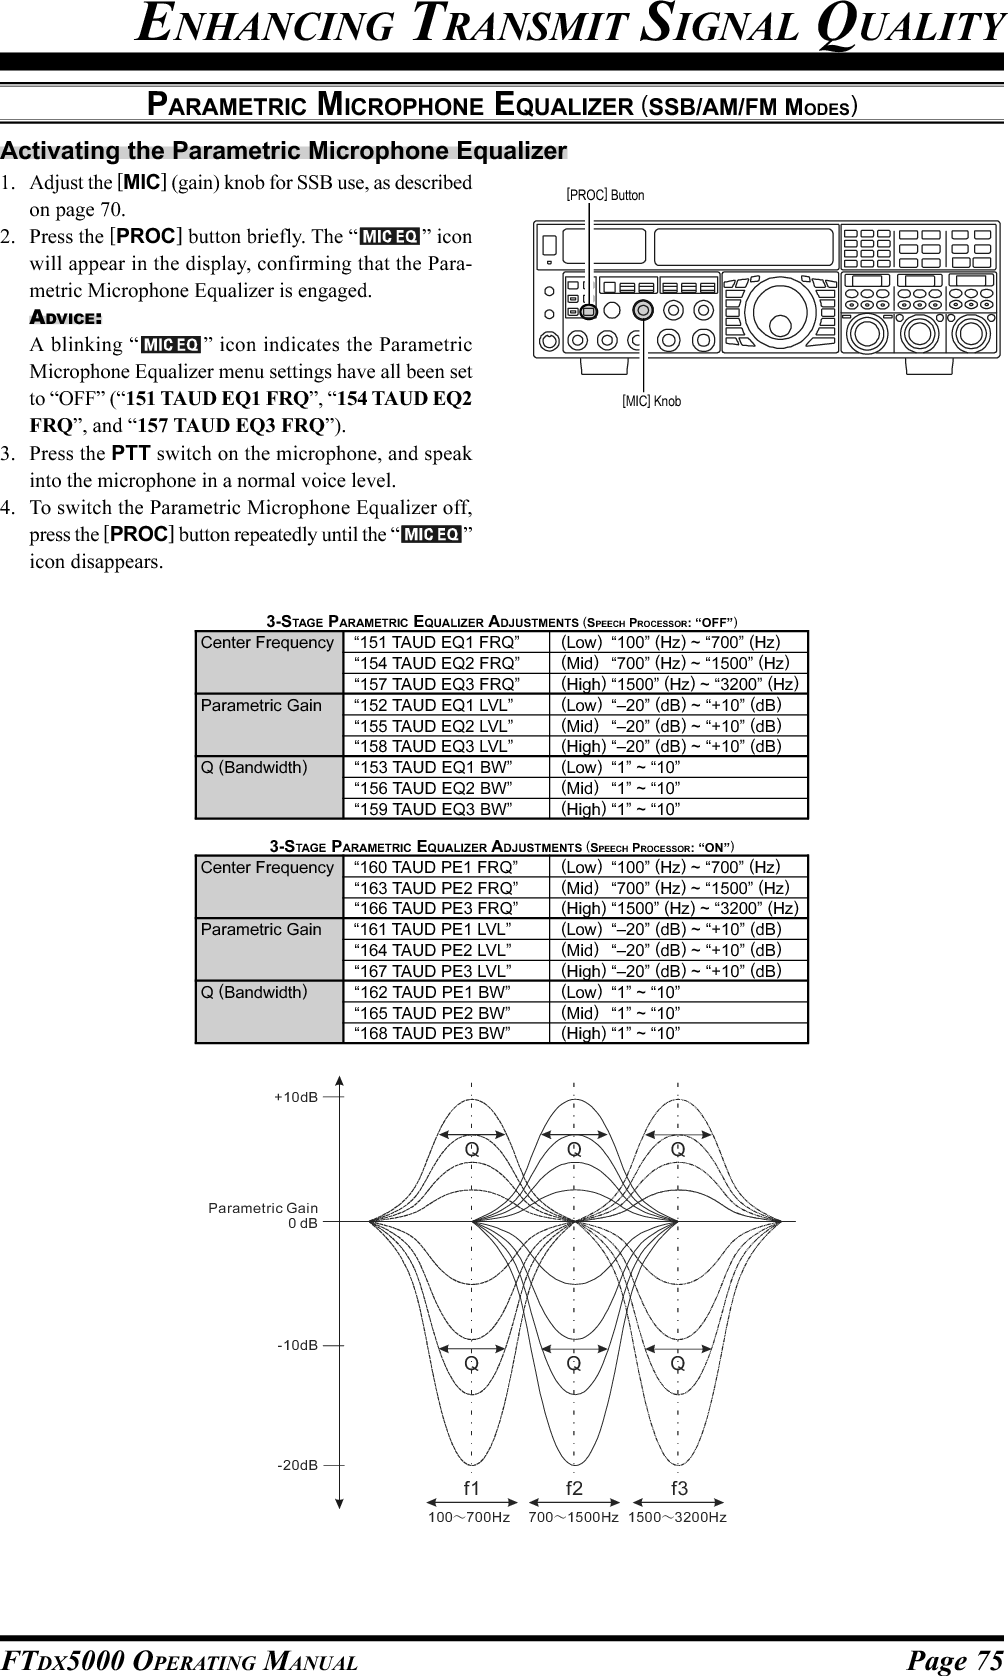 Page 75FTDX5000 OPERATING MANUALPARAMETRIC MICROPHONE EQUALIZER (SSB/AM/FM MODES)QQQQQf3f2f1100 700Hz～700 1500Hz～1500 3200Hz～Q+10dB-10dB-20dBParametric Gain0 dBActivating the Parametric Microphone Equalizer1. Adjust the [MIC] (gain) knob for SSB use, as describedon page 70.2. Press the [PROC] button briefly. The “ ” iconwill appear in the display, confirming that the Para-metric Microphone Equalizer is engaged.ADVICE:A blinking “ ” icon indicates the ParametricMicrophone Equalizer menu settings have all been setto “OFF” (“151 TAUD EQ1 FRQ”, “154 TAUD EQ2FRQ”, and “157 TAUD EQ3 FRQ”).3. Press the PTT switch on the microphone, and speakinto the microphone in a normal voice level.4. To switch the Parametric Microphone Equalizer off,press the [PROC] button repeatedly until the “ ”icon disappears.[PROC] Button[MIC] Knob3-STAGE PARAMETRIC EQUALIZER ADJUSTMENTS (SPEECH PROCESSOR: “OFF”)Center Frequency “151 TAUD EQ1 FRQ” (Low)“100” (Hz) ~ “700” (Hz)“154 TAUD EQ2 FRQ” (Mid)“700” (Hz) ~ “1500” (Hz)“157 TAUD EQ3 FRQ” (High)“1500” (Hz) ~ “3200” (Hz)Parametric Gain “152 TAUD EQ1 LVL” (Low)“–20” (dB) ~ “+10” (dB)“155 TAUD EQ2 LVL” (Mid)“–20” (dB) ~ “+10” (dB)“158 TAUD EQ3 LVL” (High)“–20” (dB) ~ “+10” (dB)Q (Bandwidth)“153 TAUD EQ1 BW” (Low)“1” ~ “10”“156 TAUD EQ2 BW” (Mid)“1” ~ “10”“159 TAUD EQ3 BW” (High)“1” ~ “10”3-STAGE PARAMETRIC EQUALIZER ADJUSTMENTS (SPEECH PROCESSOR: “ON”)Center Frequency “160 TAUD PE1 FRQ” (Low)“100” (Hz) ~ “700” (Hz)“163 TAUD PE2 FRQ” (Mid)“700” (Hz) ~ “1500” (Hz)“166 TAUD PE3 FRQ” (High)“1500” (Hz) ~ “3200” (Hz)Parametric Gain “161 TAUD PE1 LVL” (Low)“–20” (dB) ~ “+10” (dB)“164 TAUD PE2 LVL” (Mid)“–20” (dB) ~ “+10” (dB)“167 TAUD PE3 LVL” (High)“–20” (dB) ~ “+10” (dB)Q (Bandwidth)“162 TAUD PE1 BW” (Low)“1” ~ “10”“165 TAUD PE2 BW” (Mid)“1” ~ “10”“168 TAUD PE3 BW” (High)“1” ~ “10”ENHANCING TRANSMIT SIGNAL QUALITY